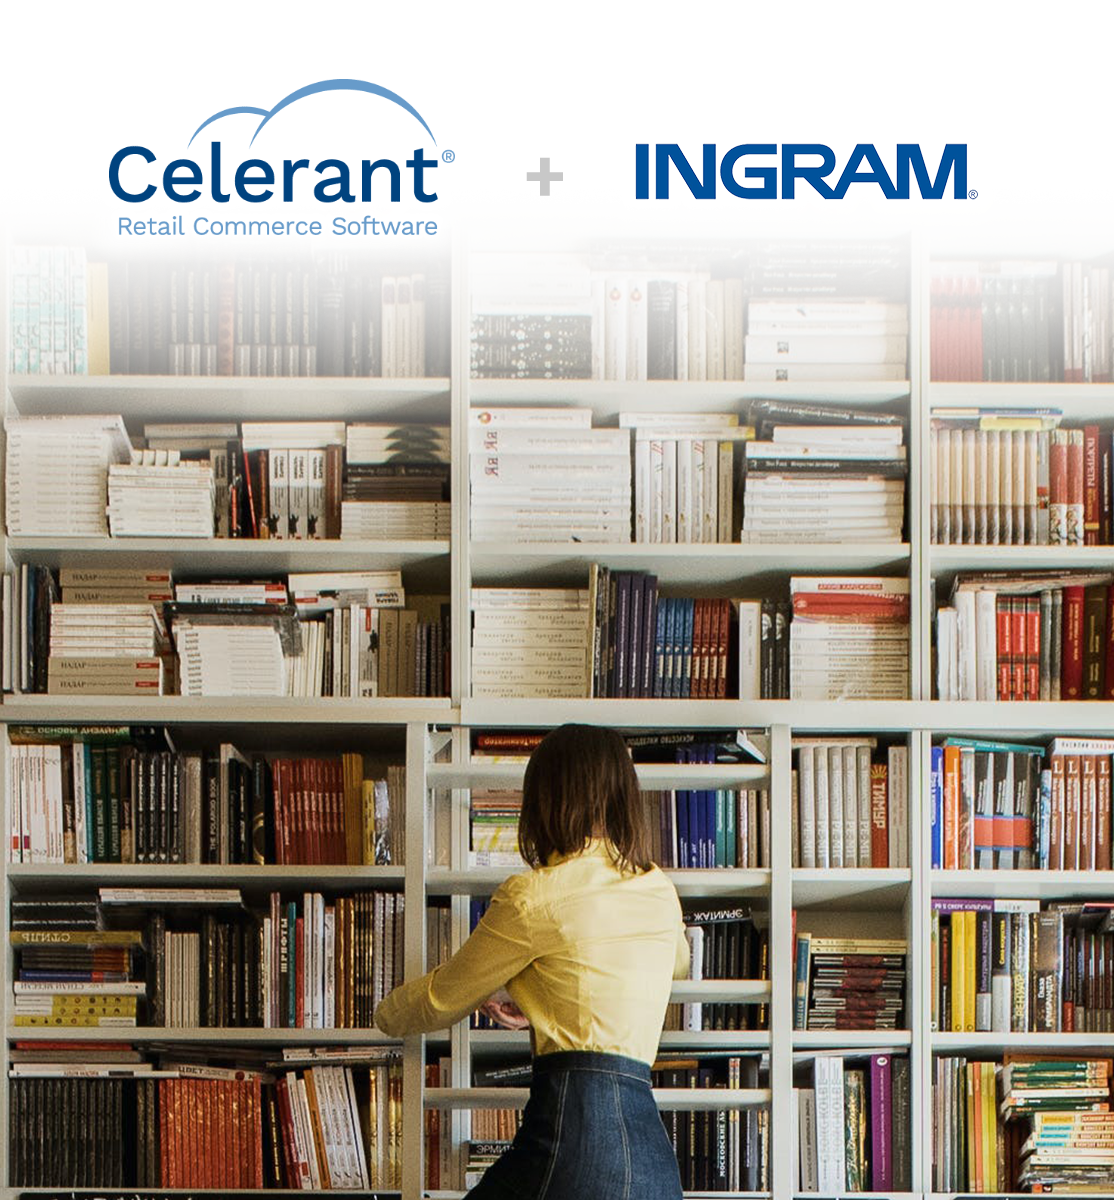 Celerant and Ingram in an independent bookstore